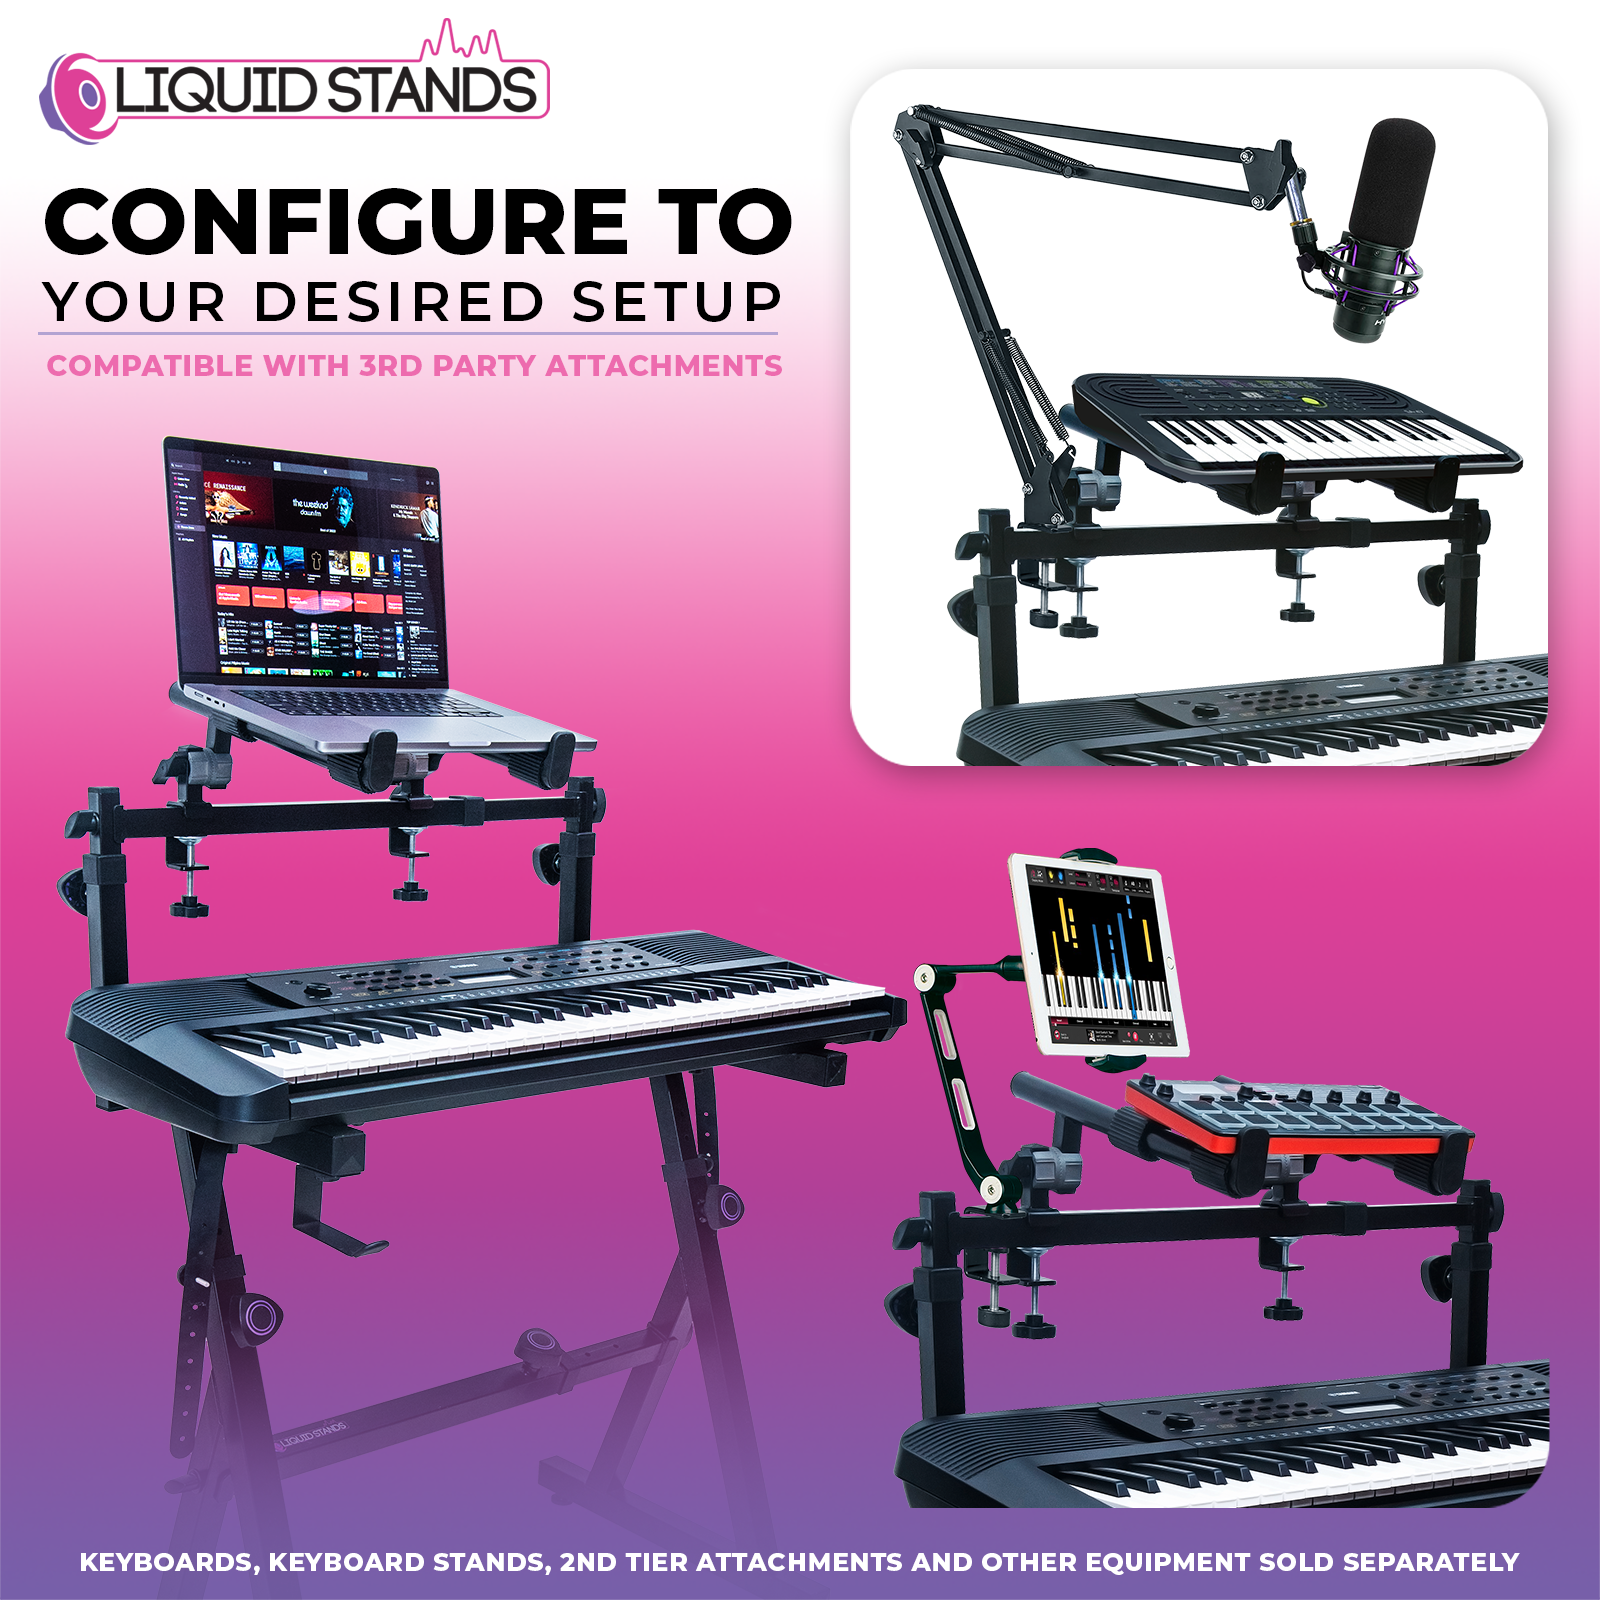 Adjustable 2-Tier Keyboard Stand Extender - Arms Only